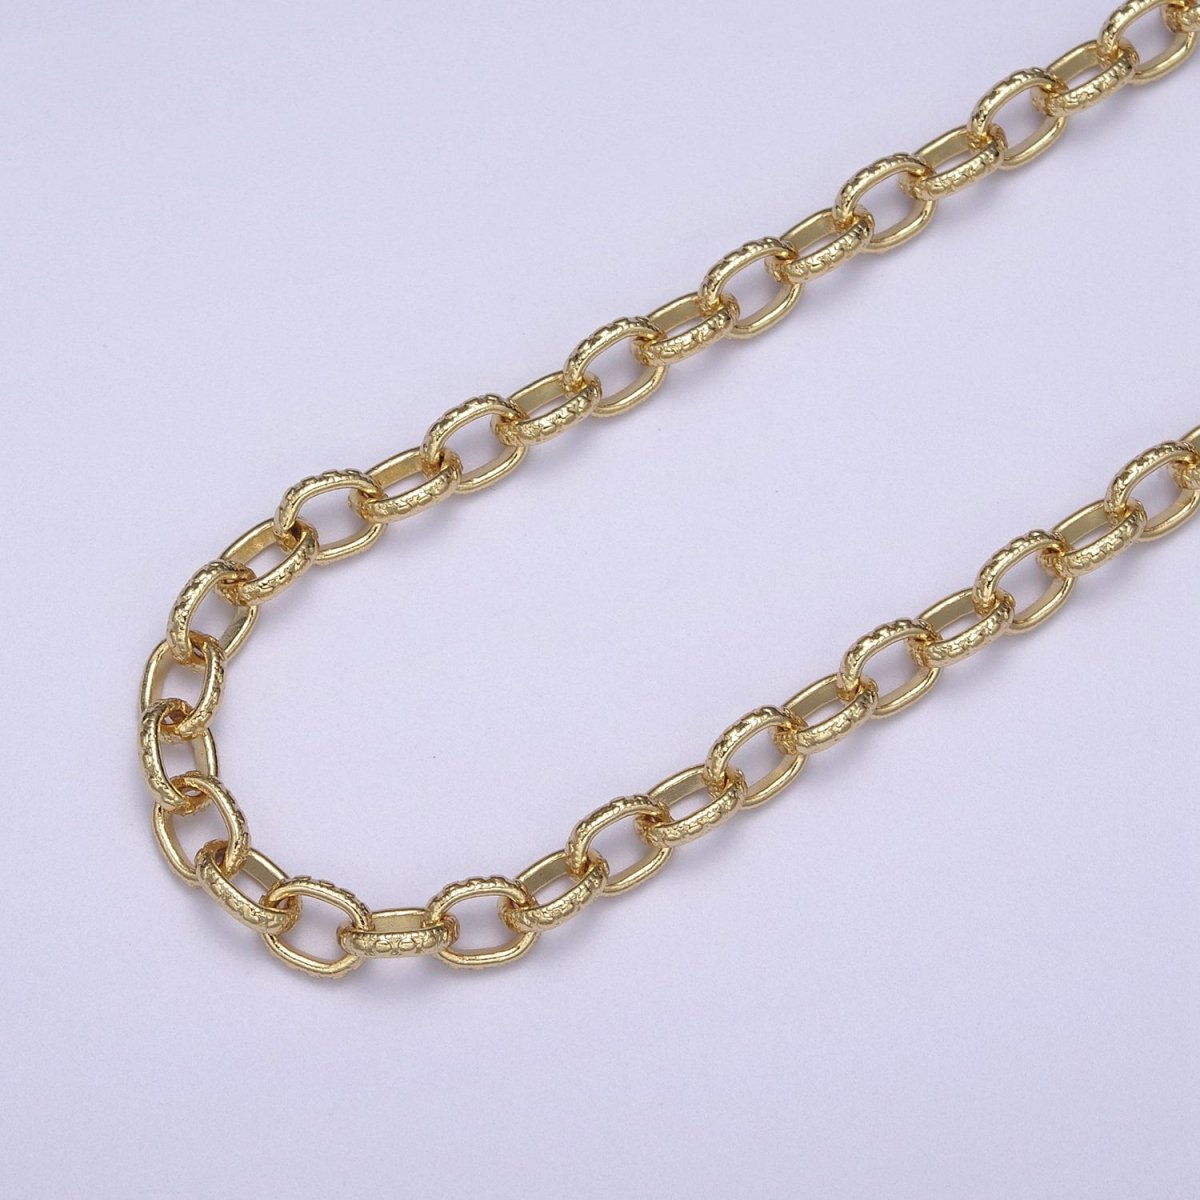 24K Gold Filled Cable Chain, 6mm Width Textured Beaded Dot Cable Chain in Gold & Silver, Wholesale Unfinished Chain For Jewelry Craft Making | ROLL-686, ROLL-687 Clearance Pricing - DLUXCA